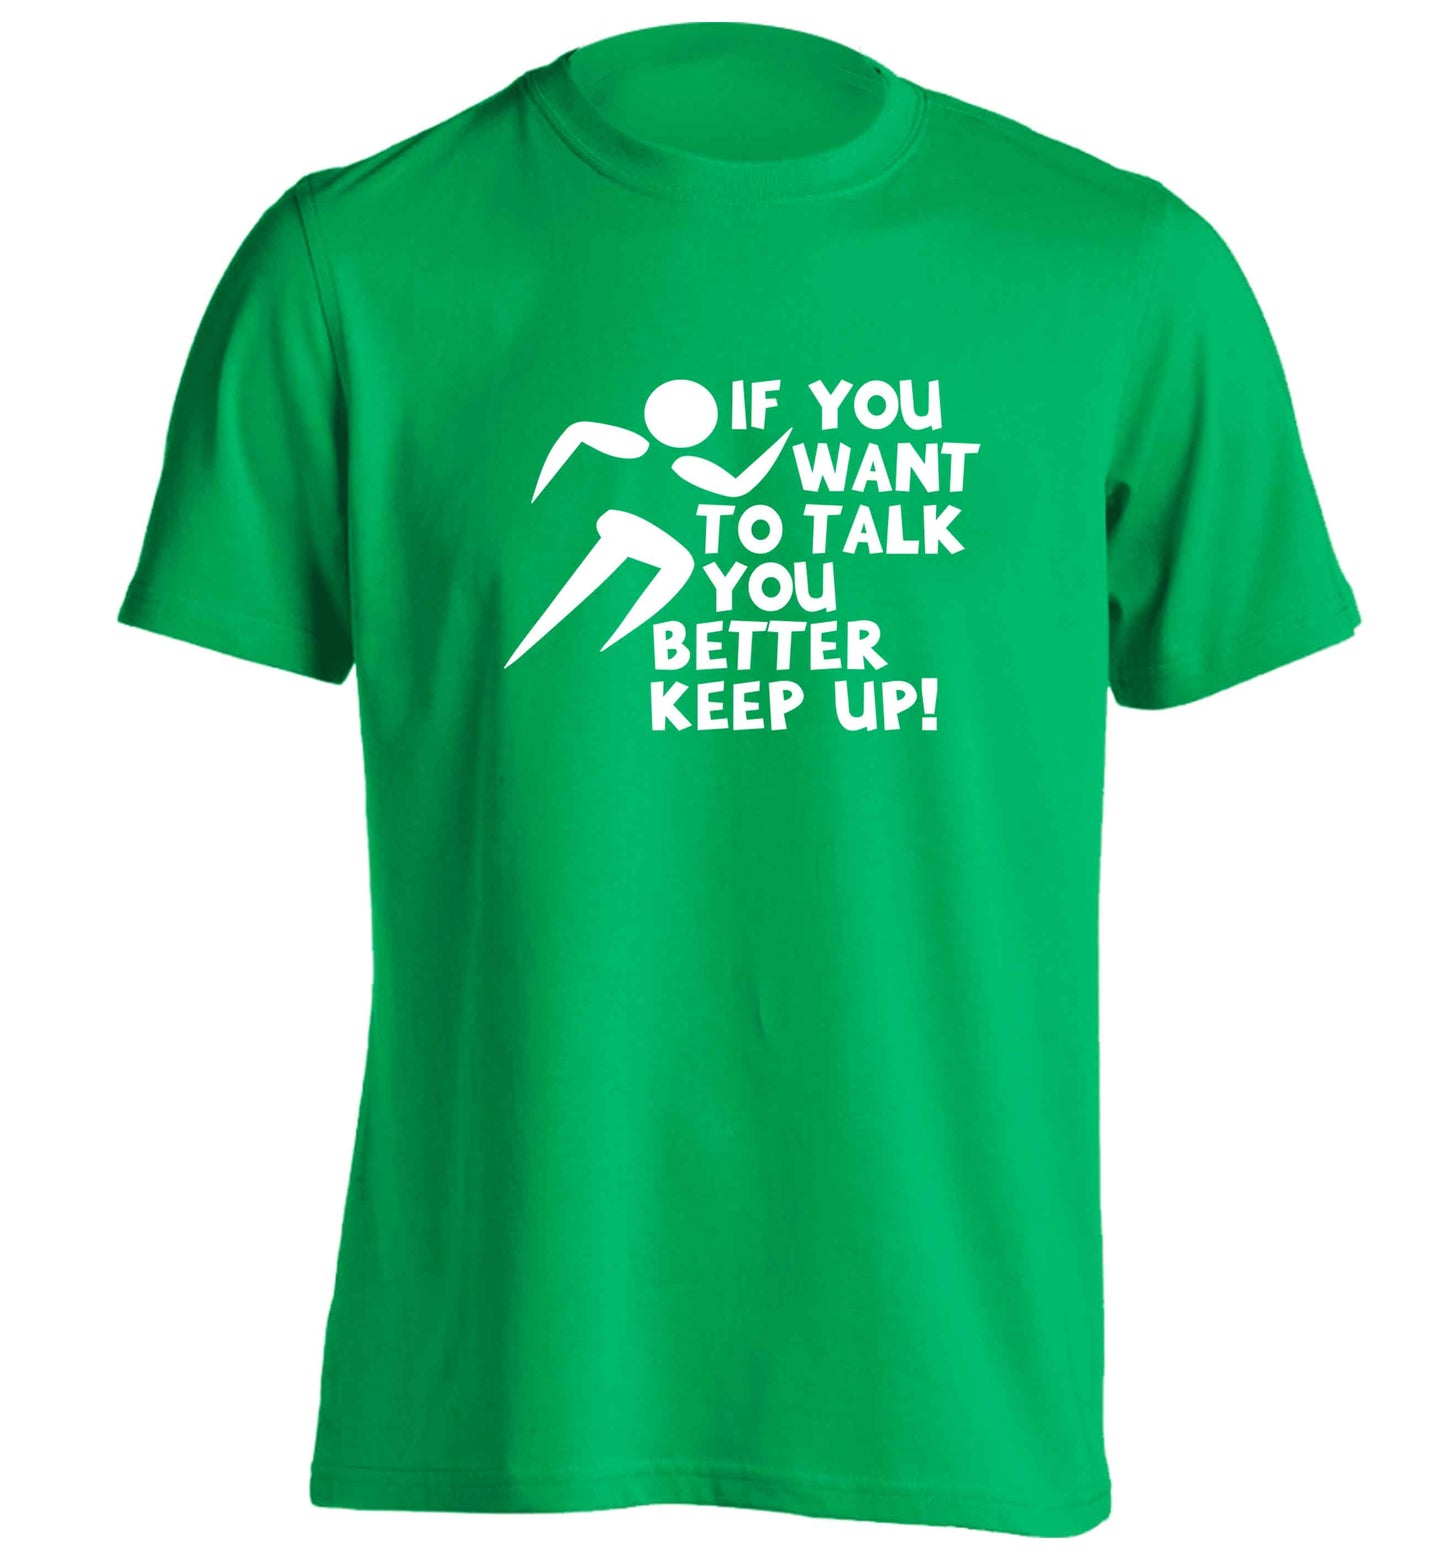 If you want to talk you better keep up! adults unisex green Tshirt 2XL